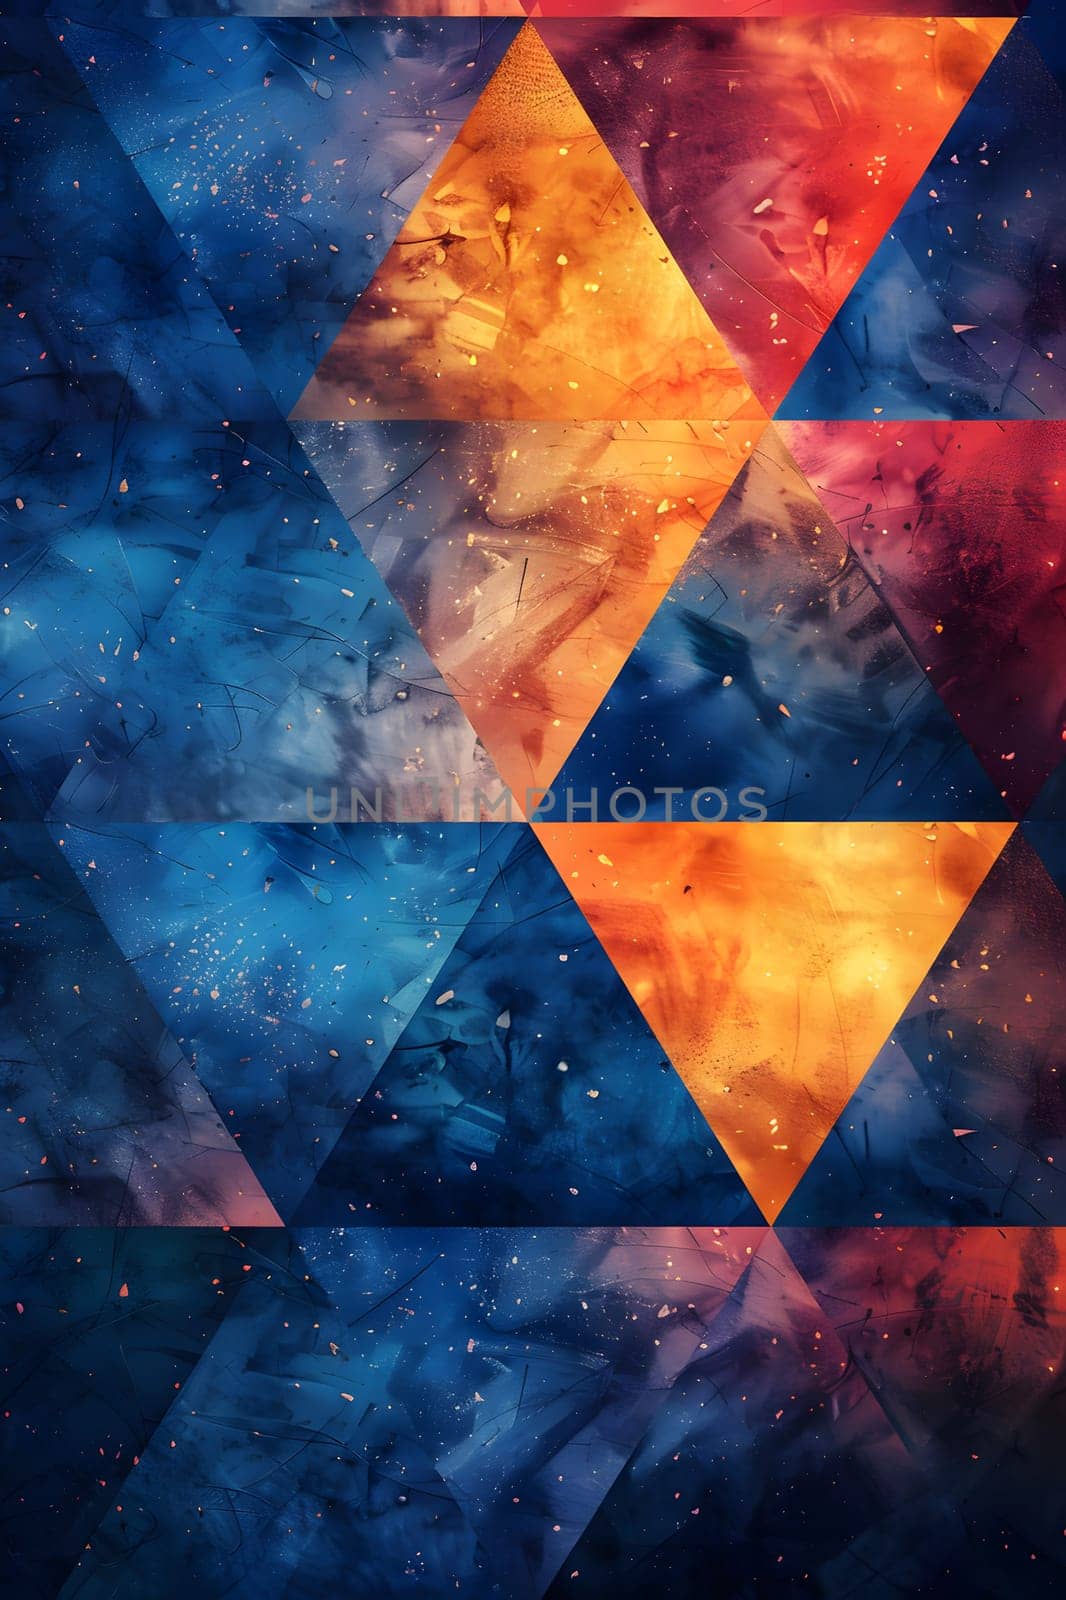 A vibrant geometric pattern featuring triangles in various tints and shades of azure and electric blue on a dark background, reminiscent of a flag waving in the sky, creating a bold artful design